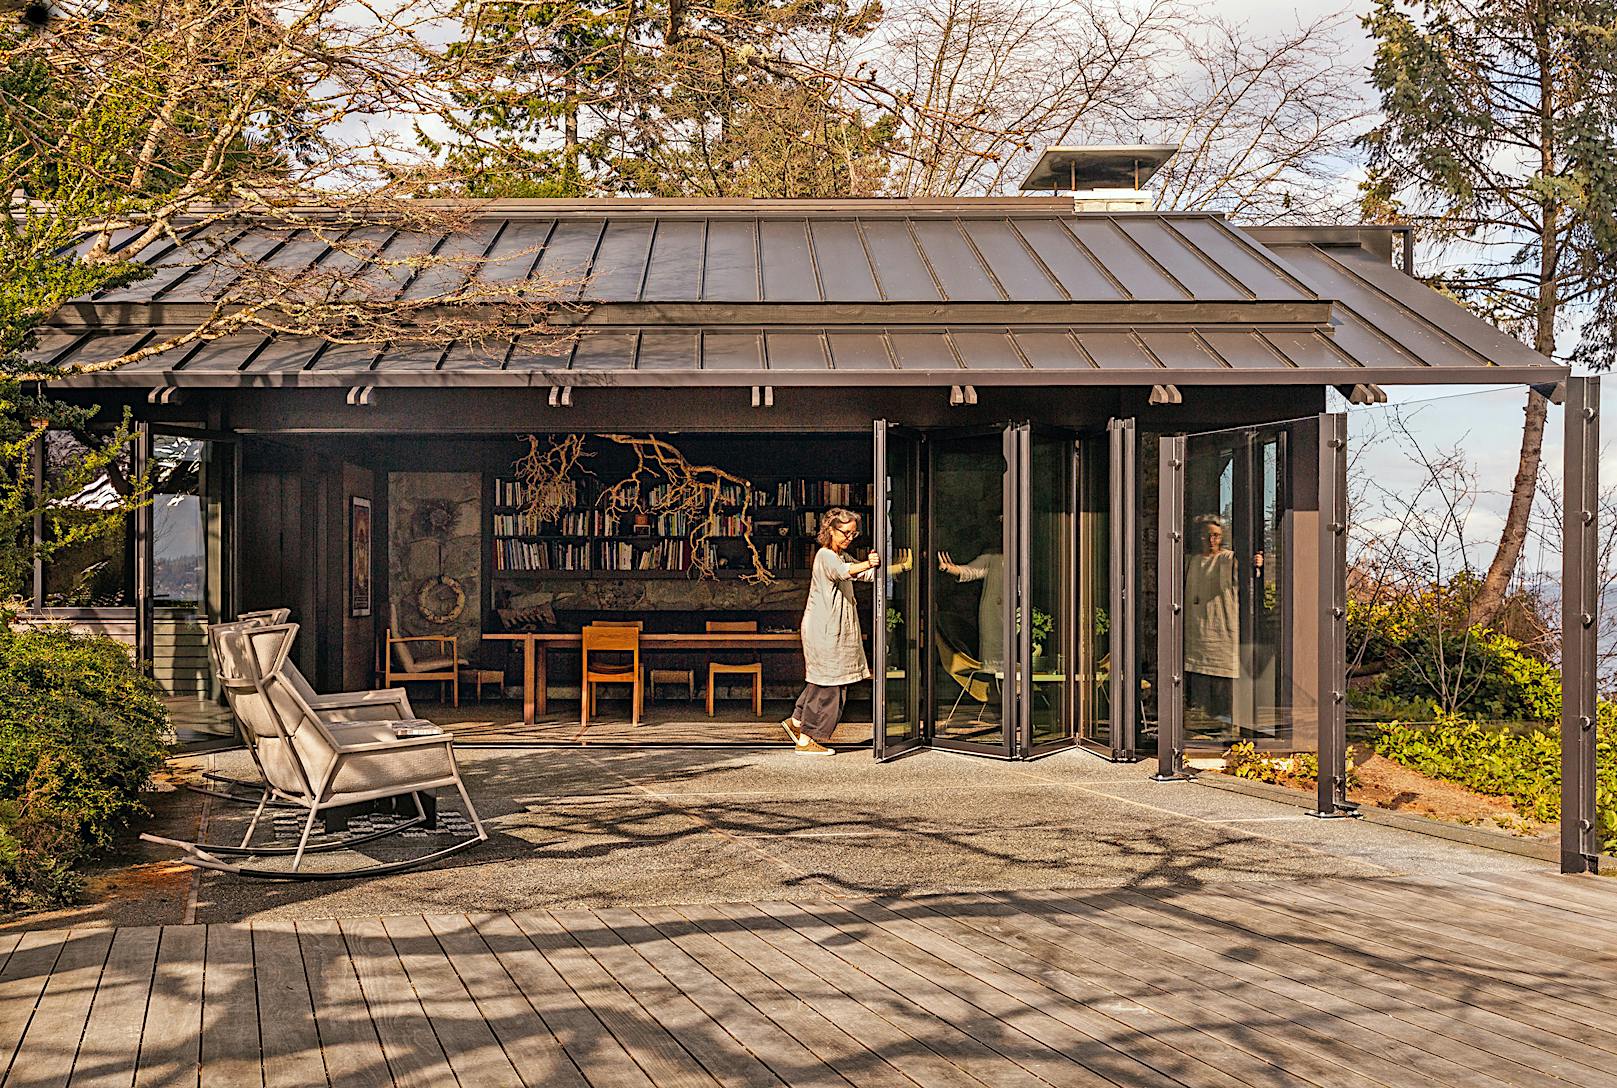 A person opens bifold glass doors of a modern building with a metal roof and outdoor seating. 